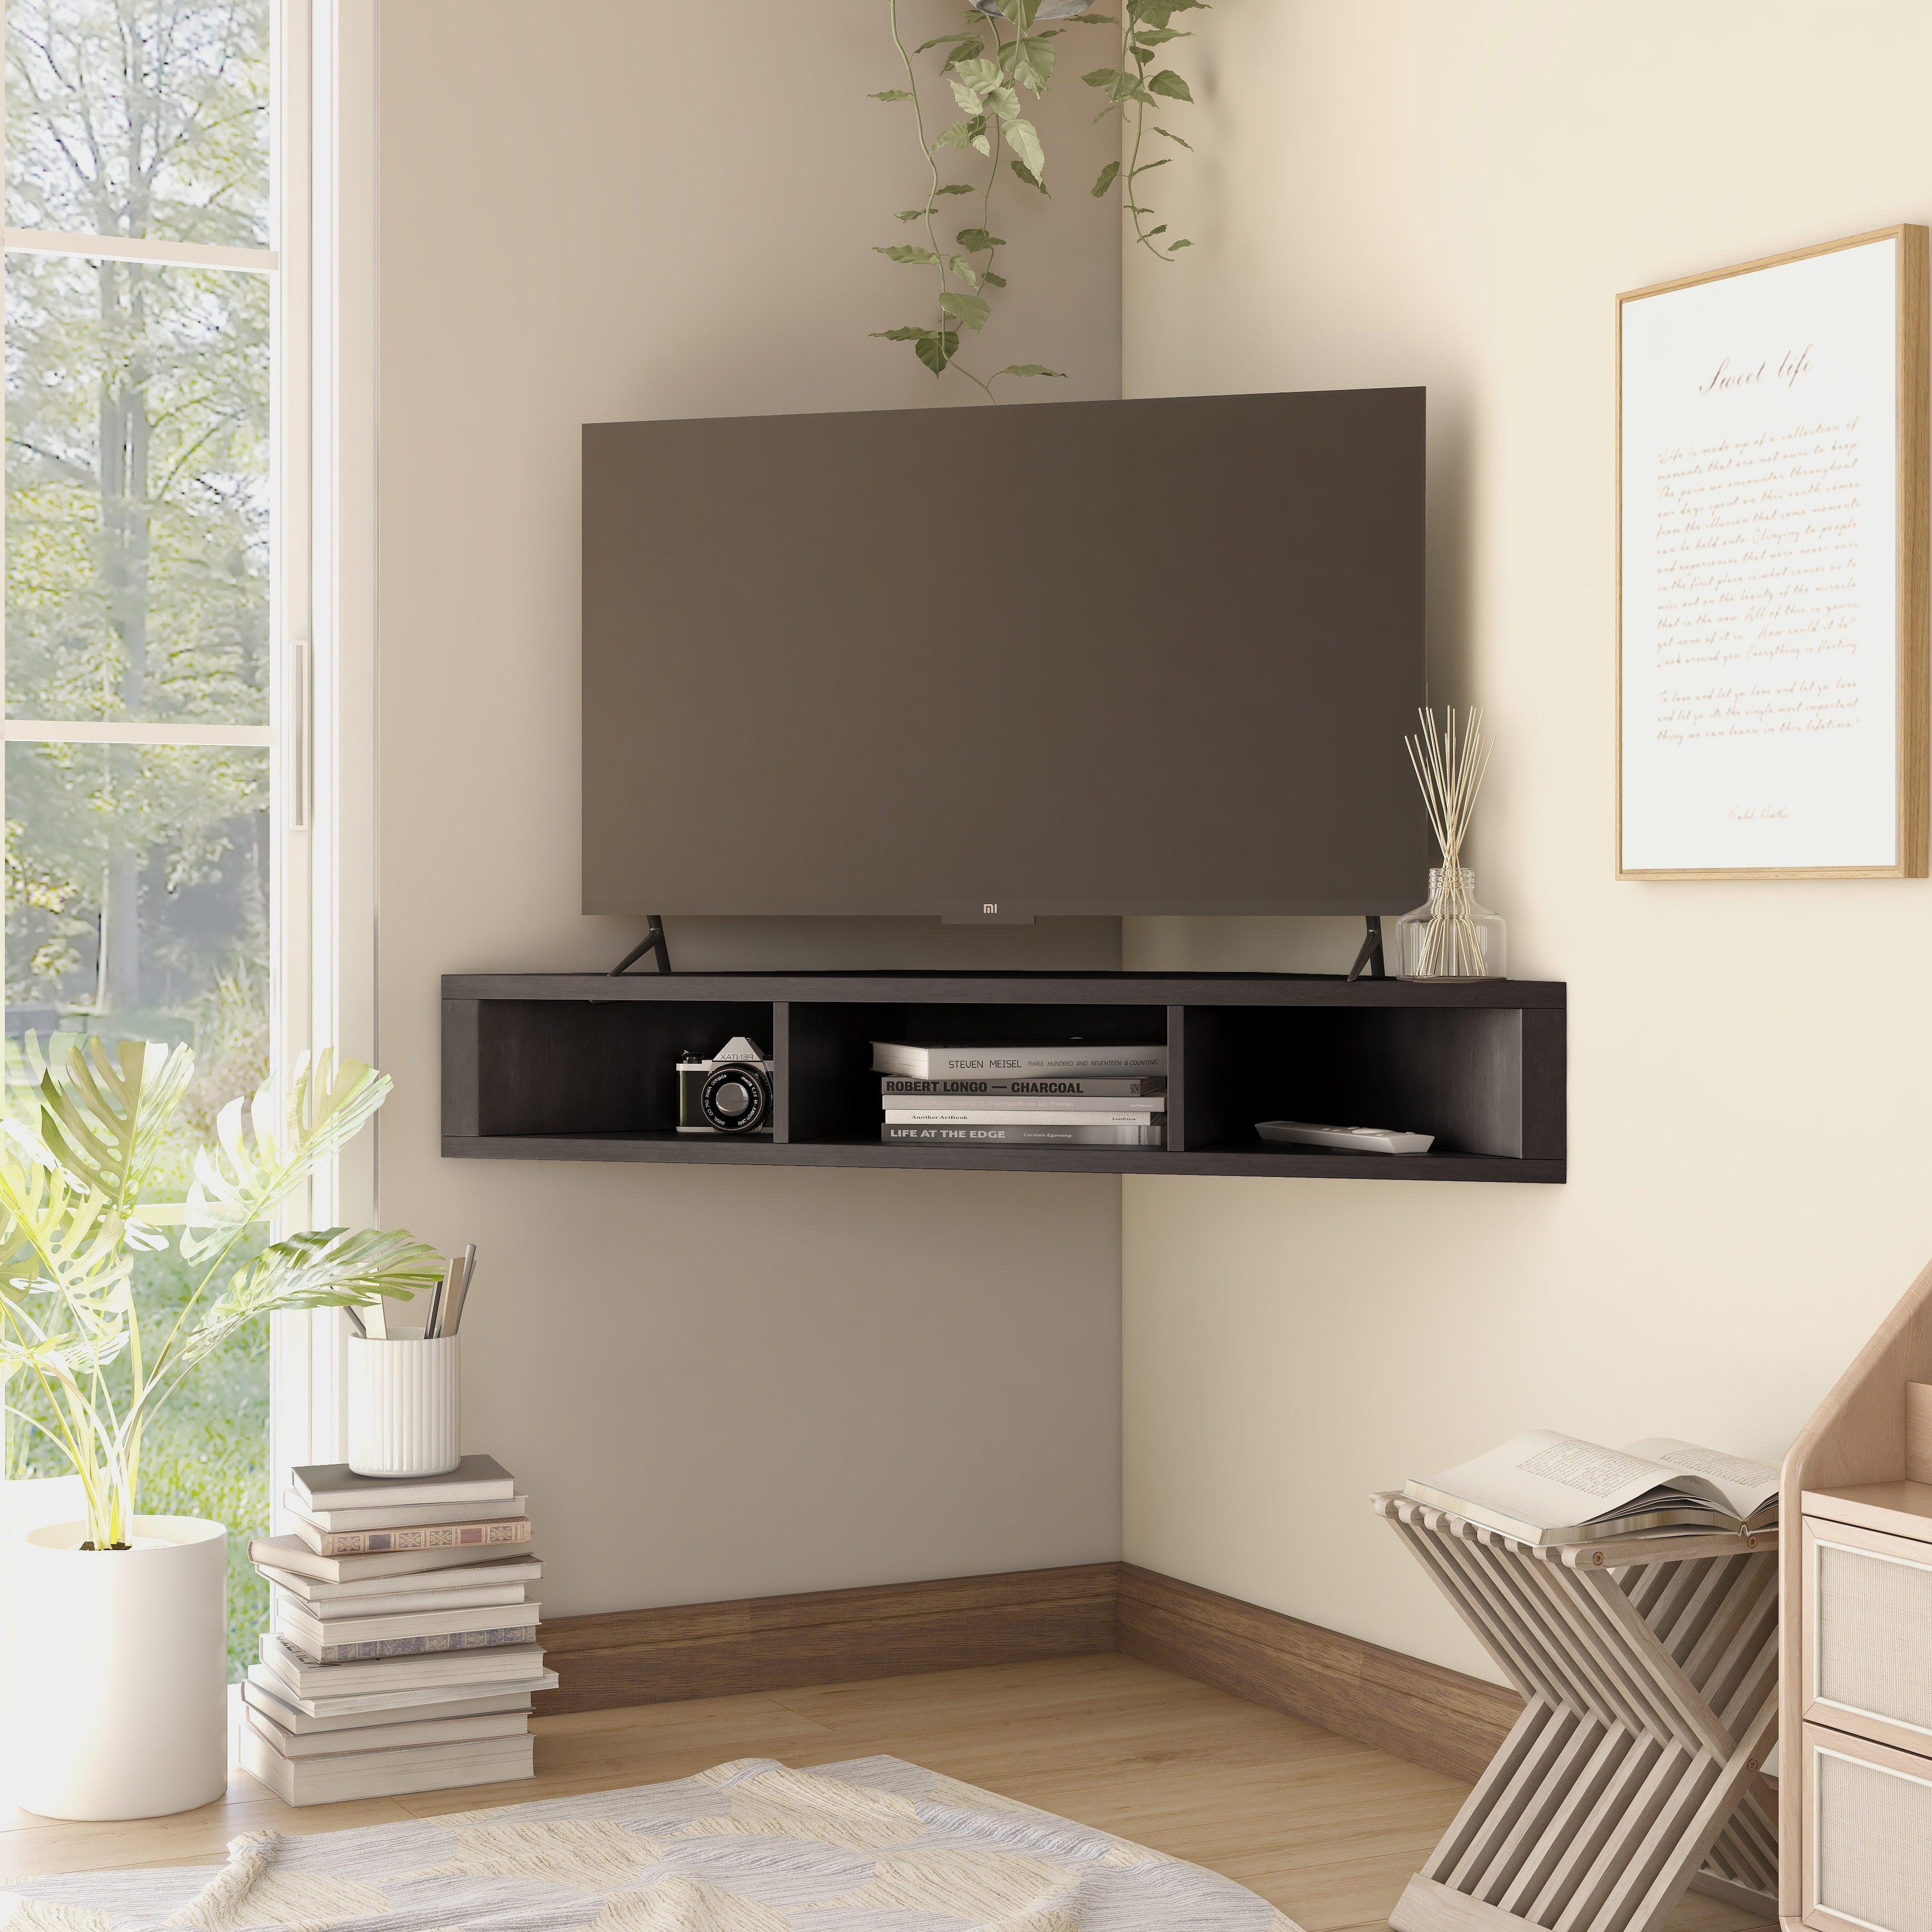 Sukhumi Transitional 3-Shelf Wall-mounted Corner TV Console by Furniture of - On Sale - Bed Bath & Beyond - 28562223